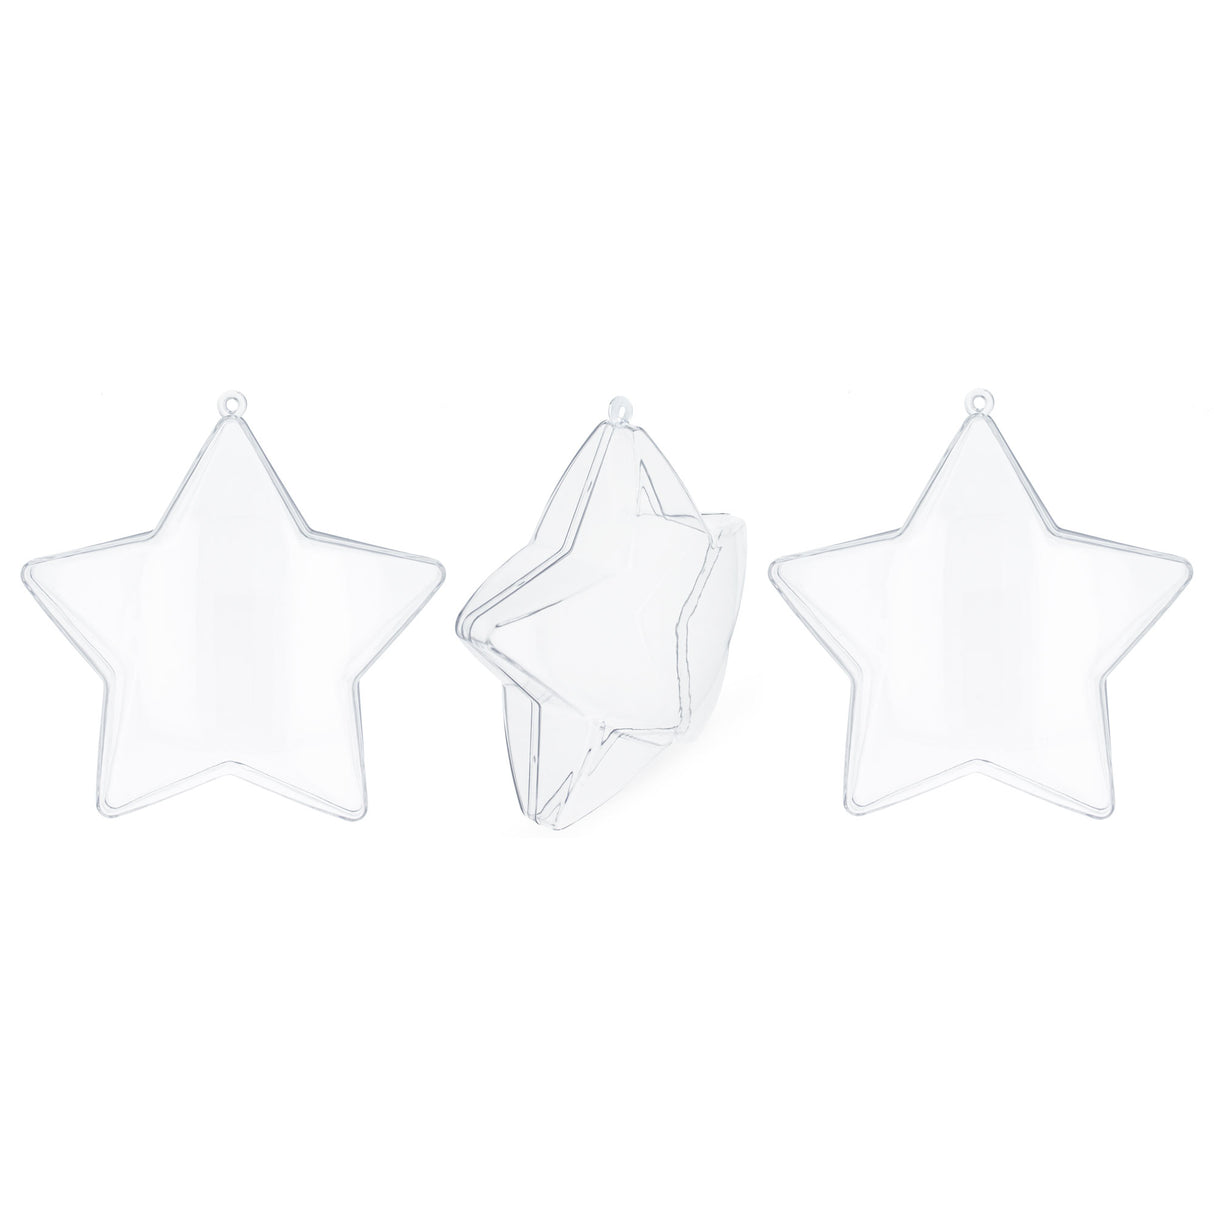 Set of 3 Clear Plastic Star Ornaments 4 Inches in Clear color, Star shape